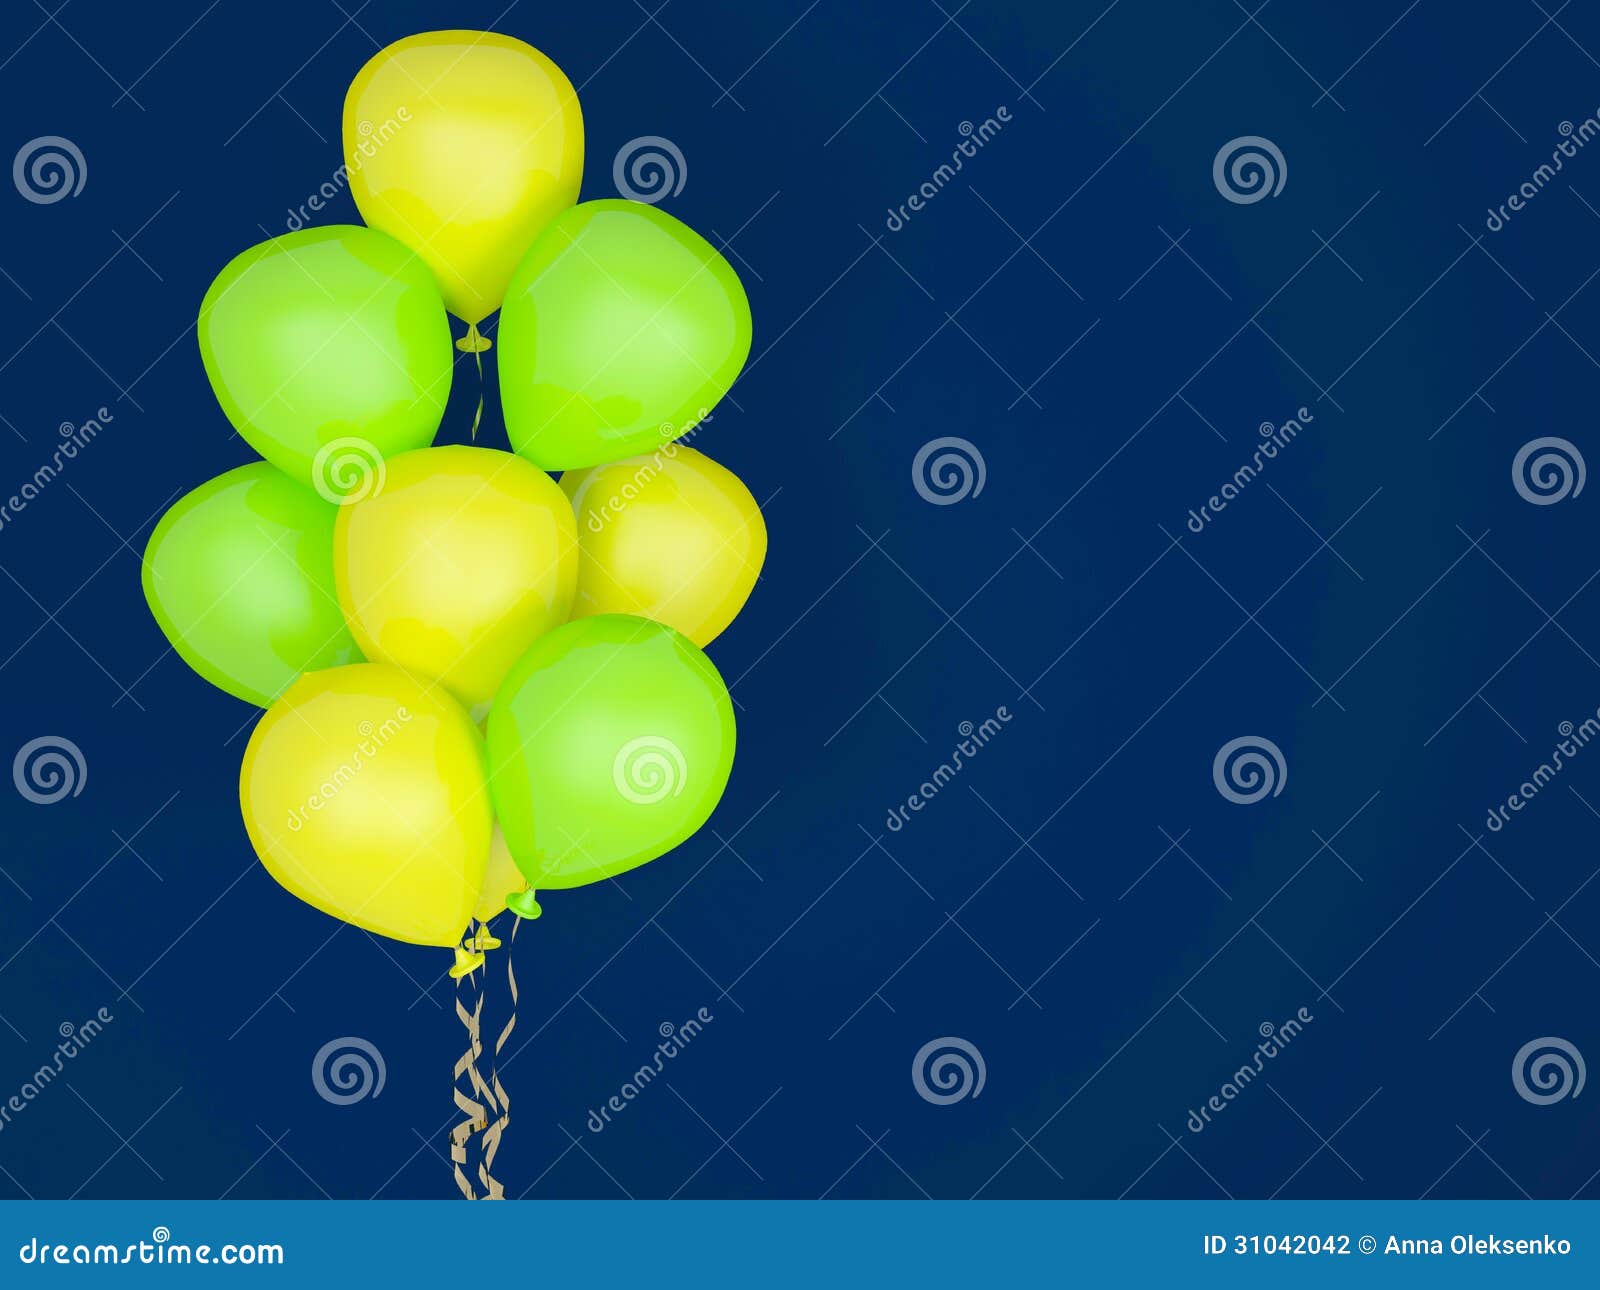 luminescent balloons on blue background.